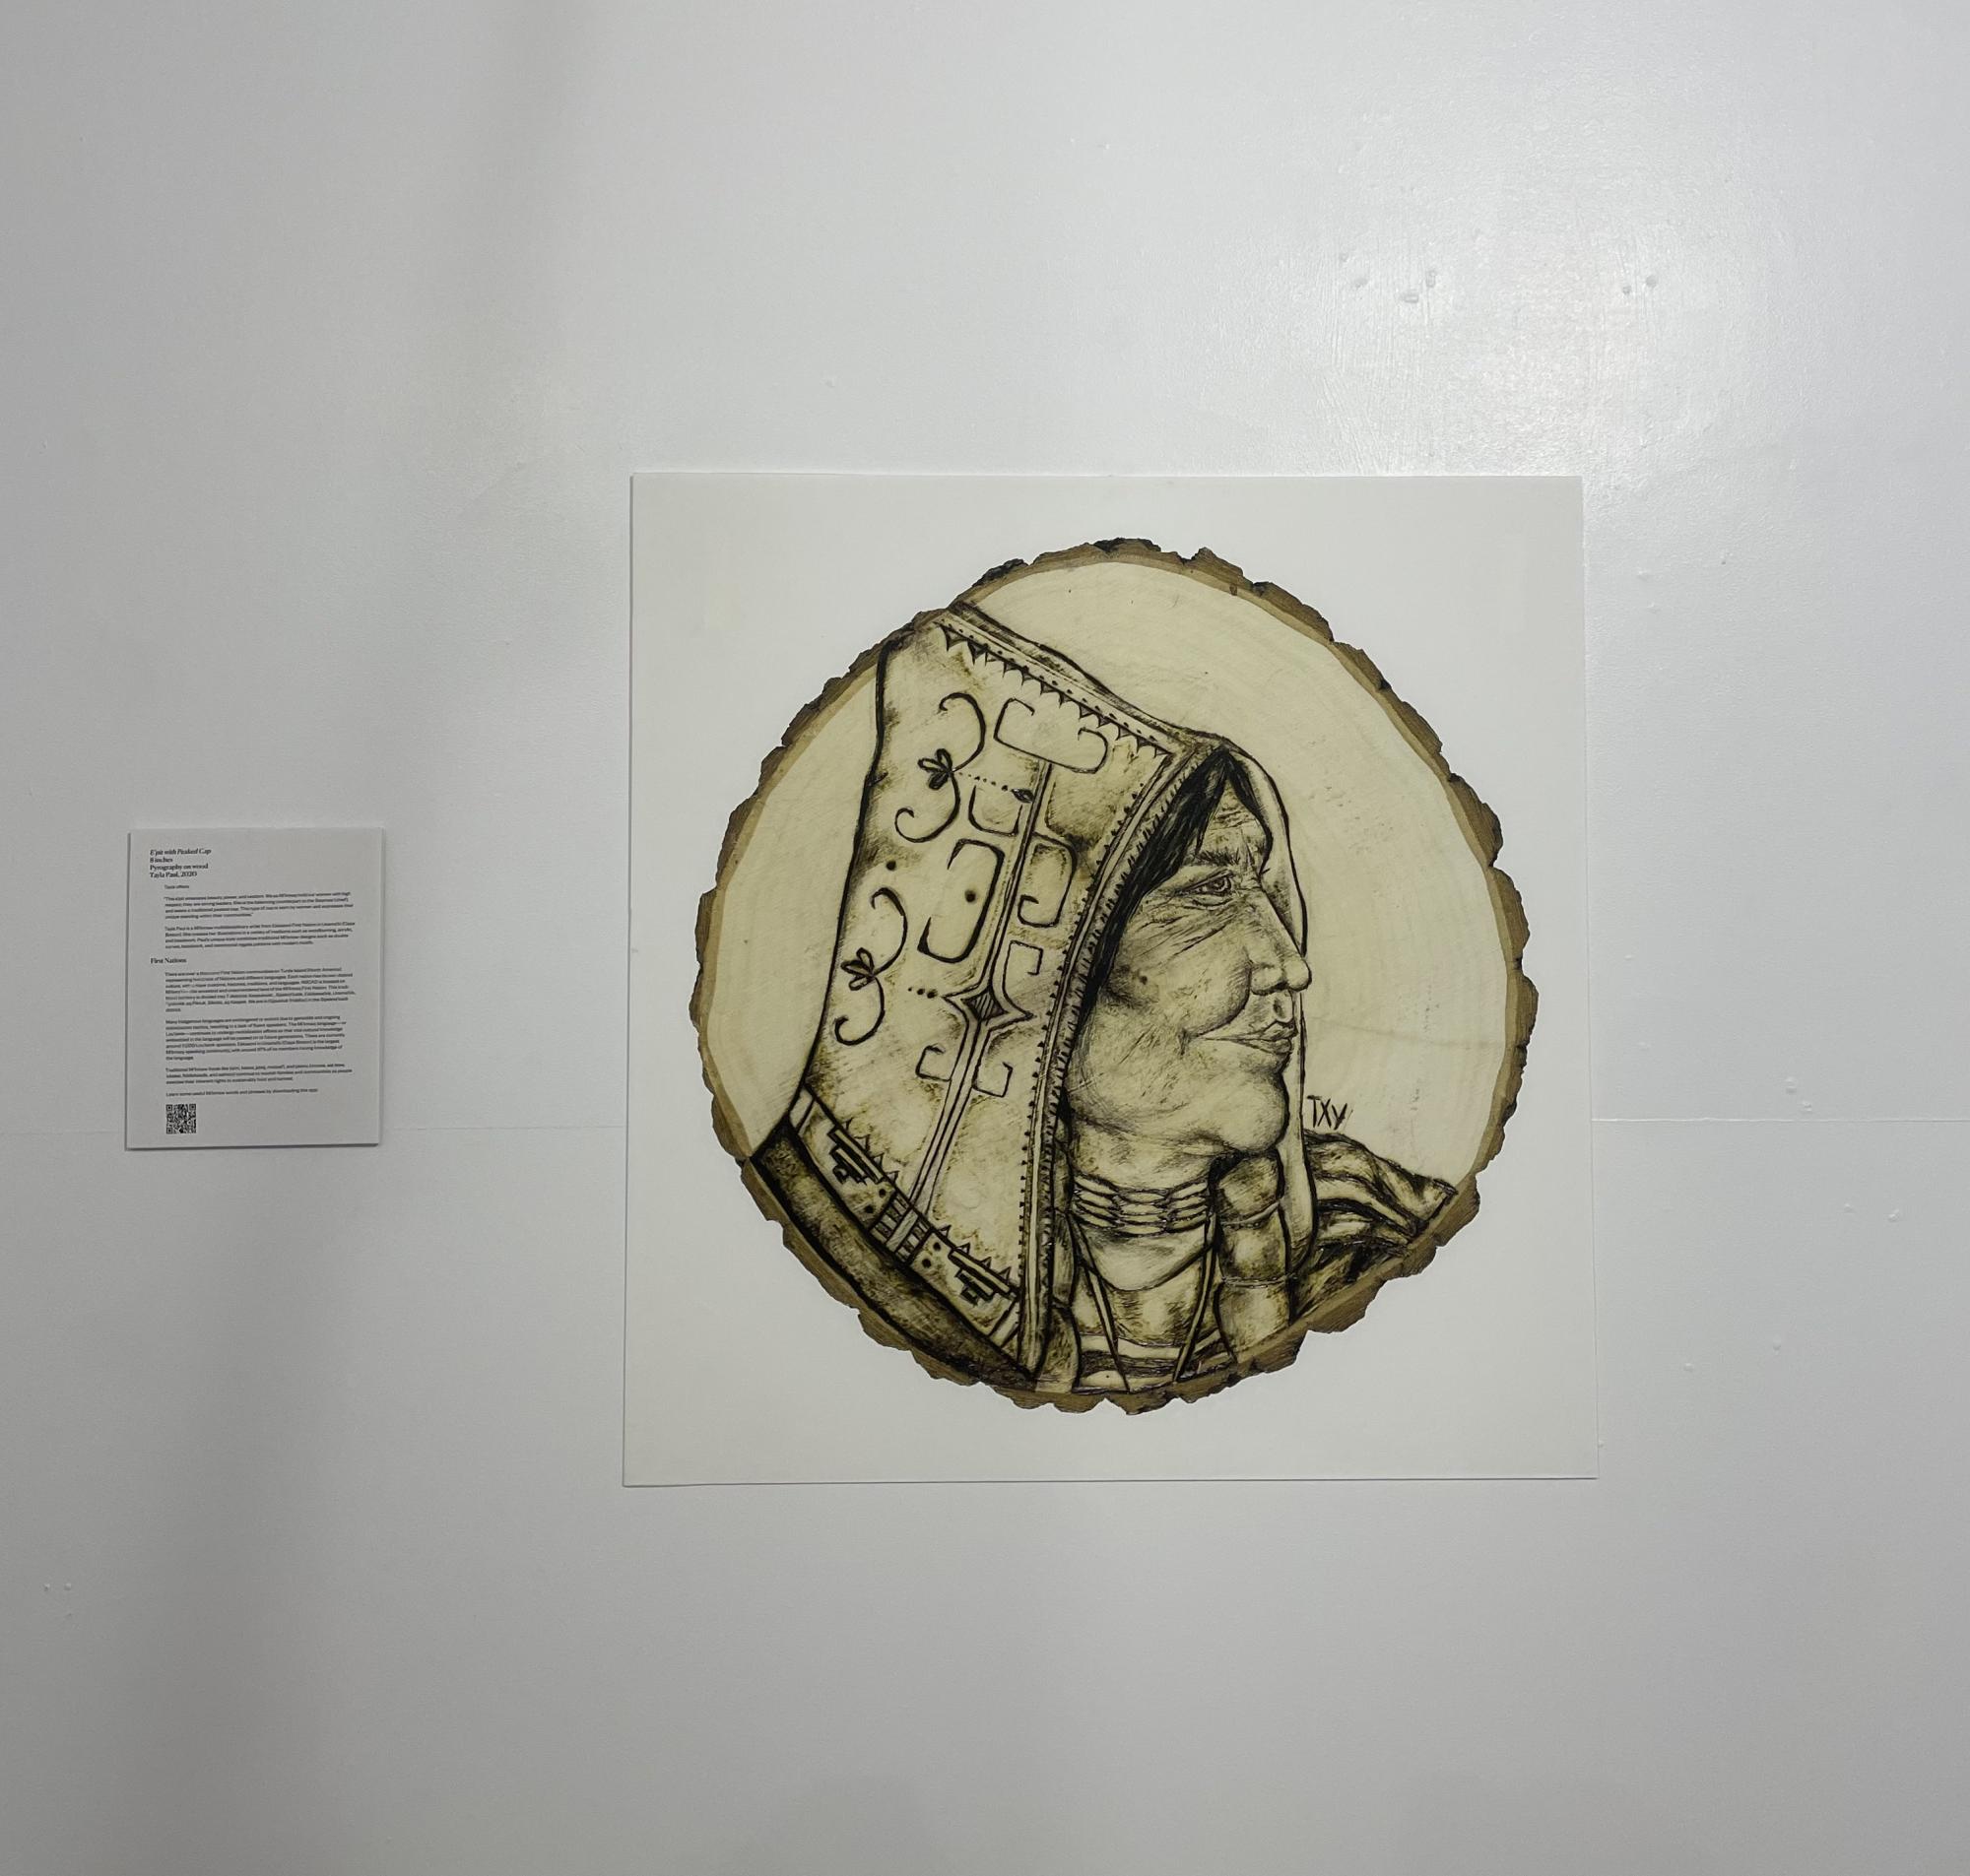 [ID: "circular disk of wood with woodburned illustration on the face of it depicting the side profile of an older l'nu woman wearing a peaked cap. She looks off to the right and is adorned with double curve motifs and bone jewellery."]